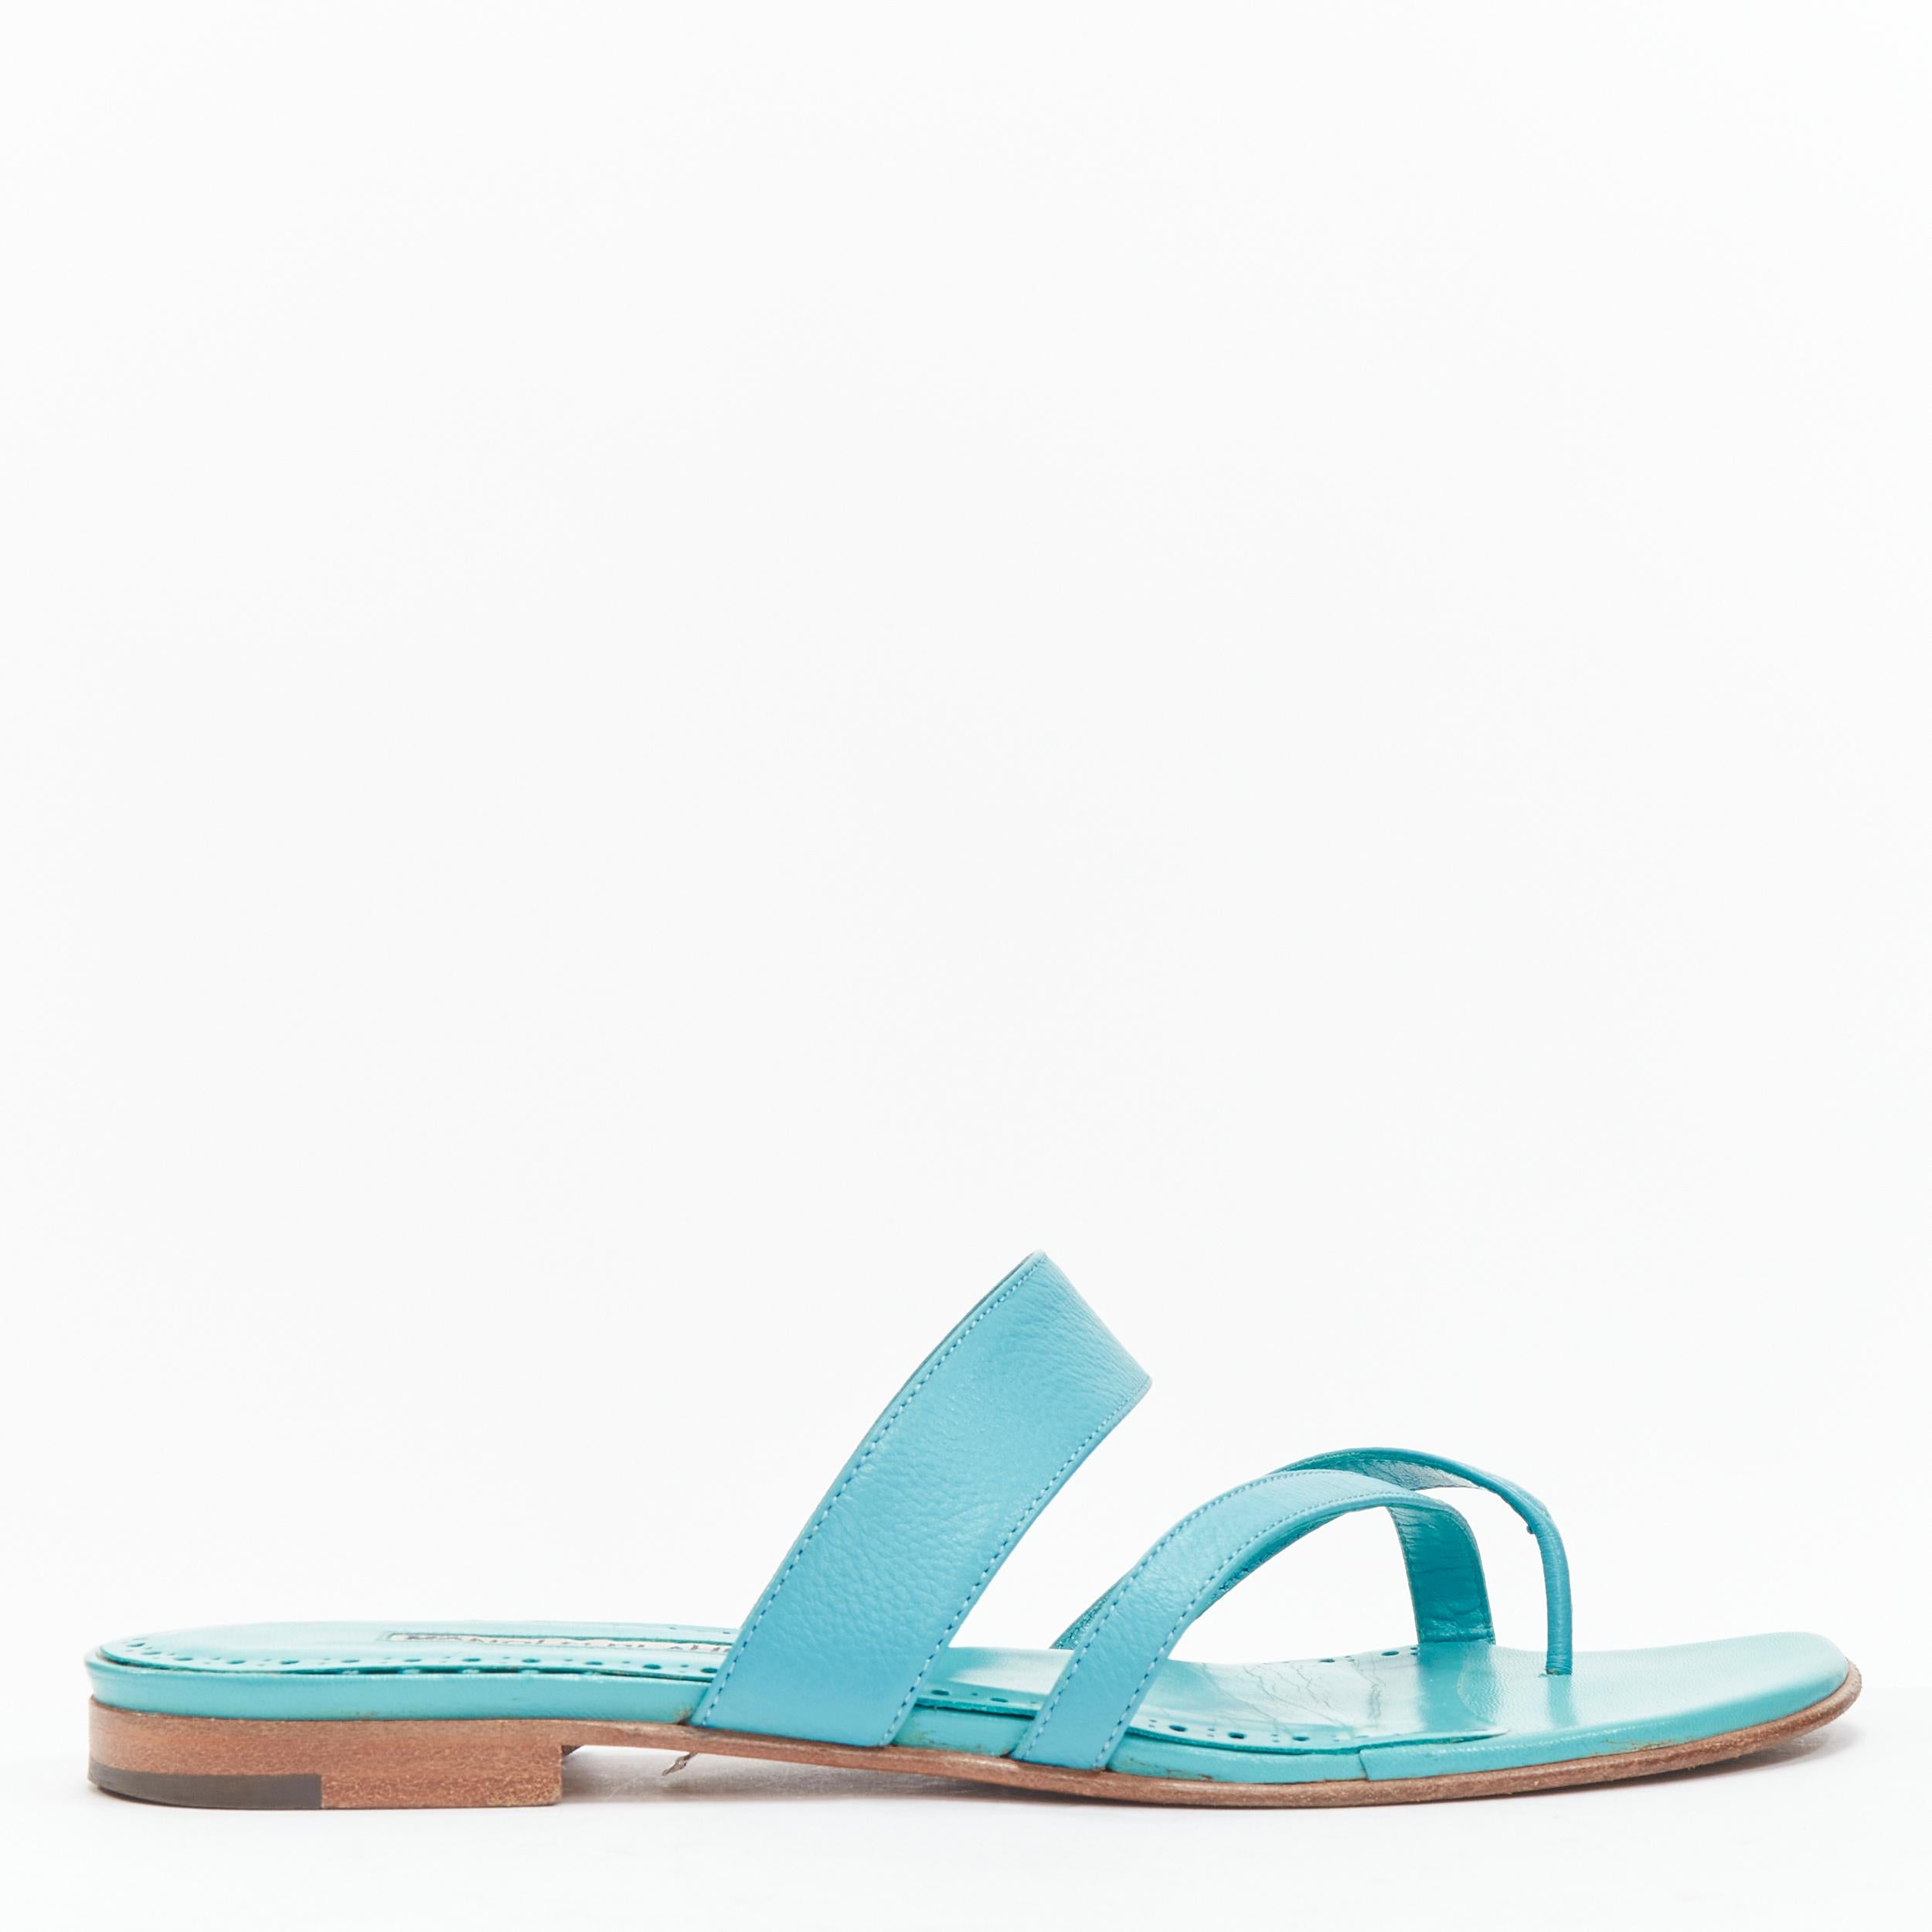 MANOLO BLAHNIK teal blue toe ring crisscross leather strappy sandals EU37.5
Reference: LNKO/A02144
Brand: Manolo Blahnik
Material: Leather
Color: Blue
Pattern: Solid
Closure: Slip On
Lining: Blue Leather
Made in: Italy

CONDITION:
Condition: Good,